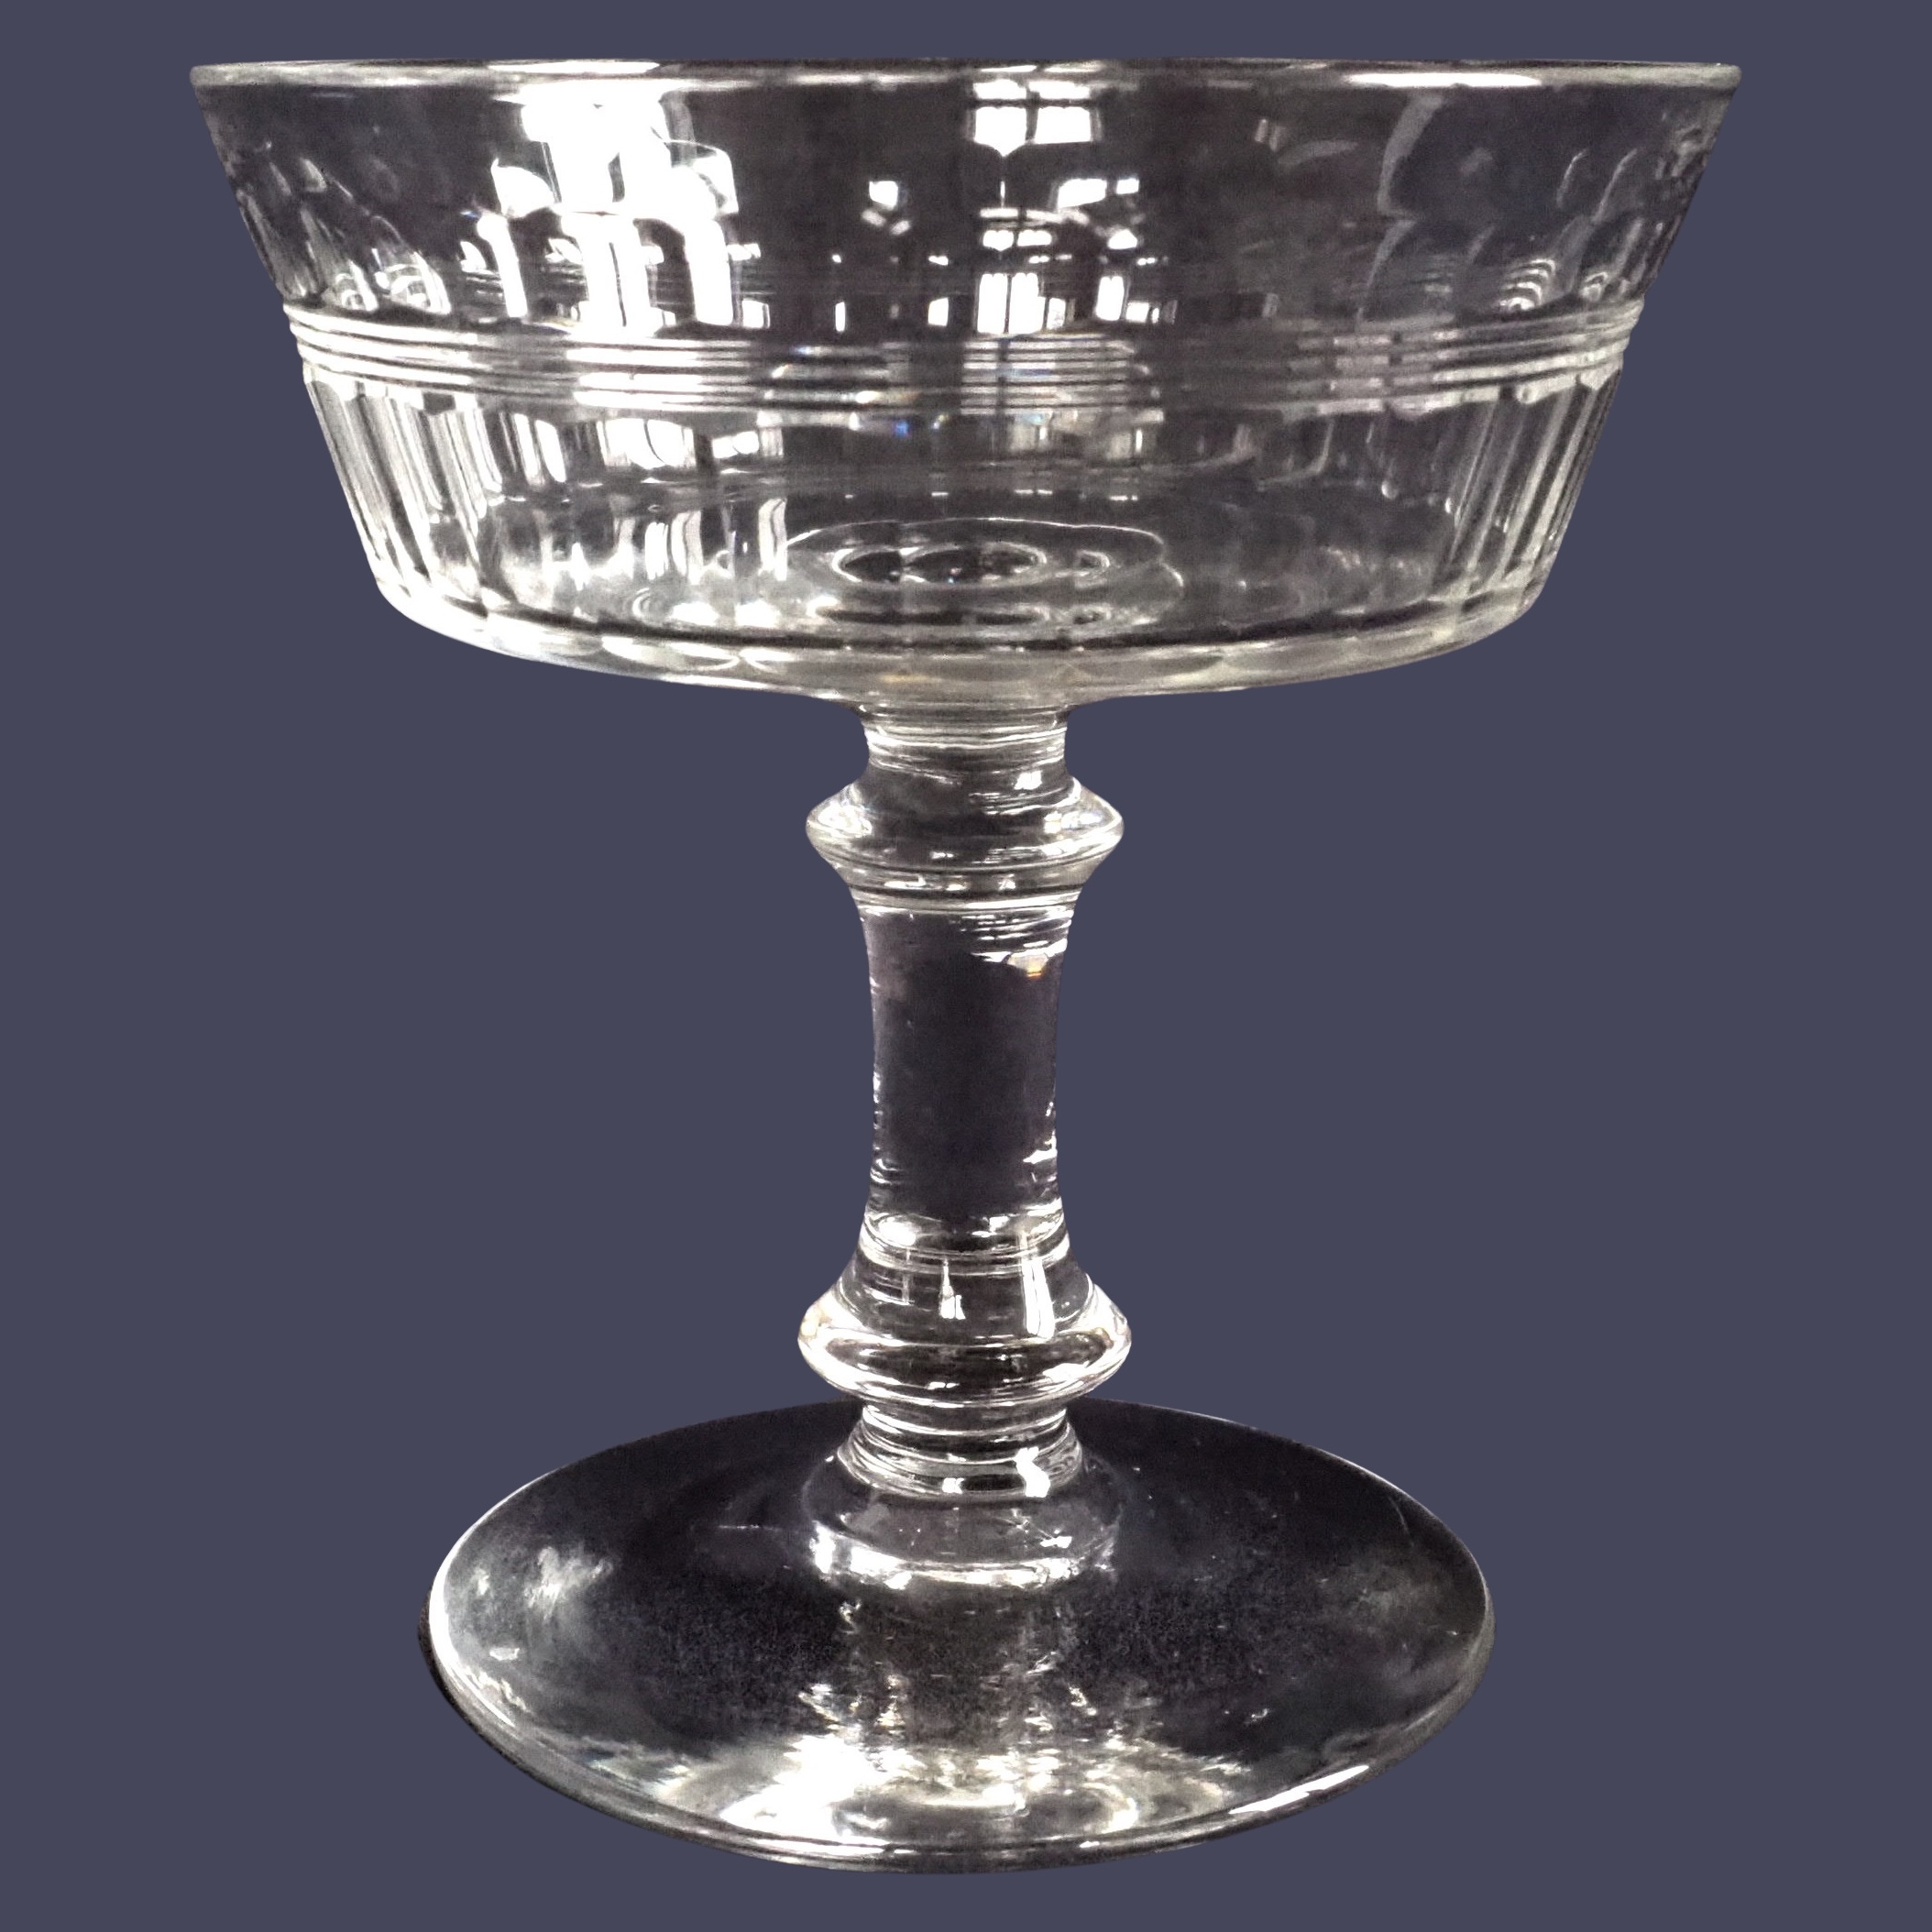 Baccarat crystal champagne glass or sherbet, cut crystal